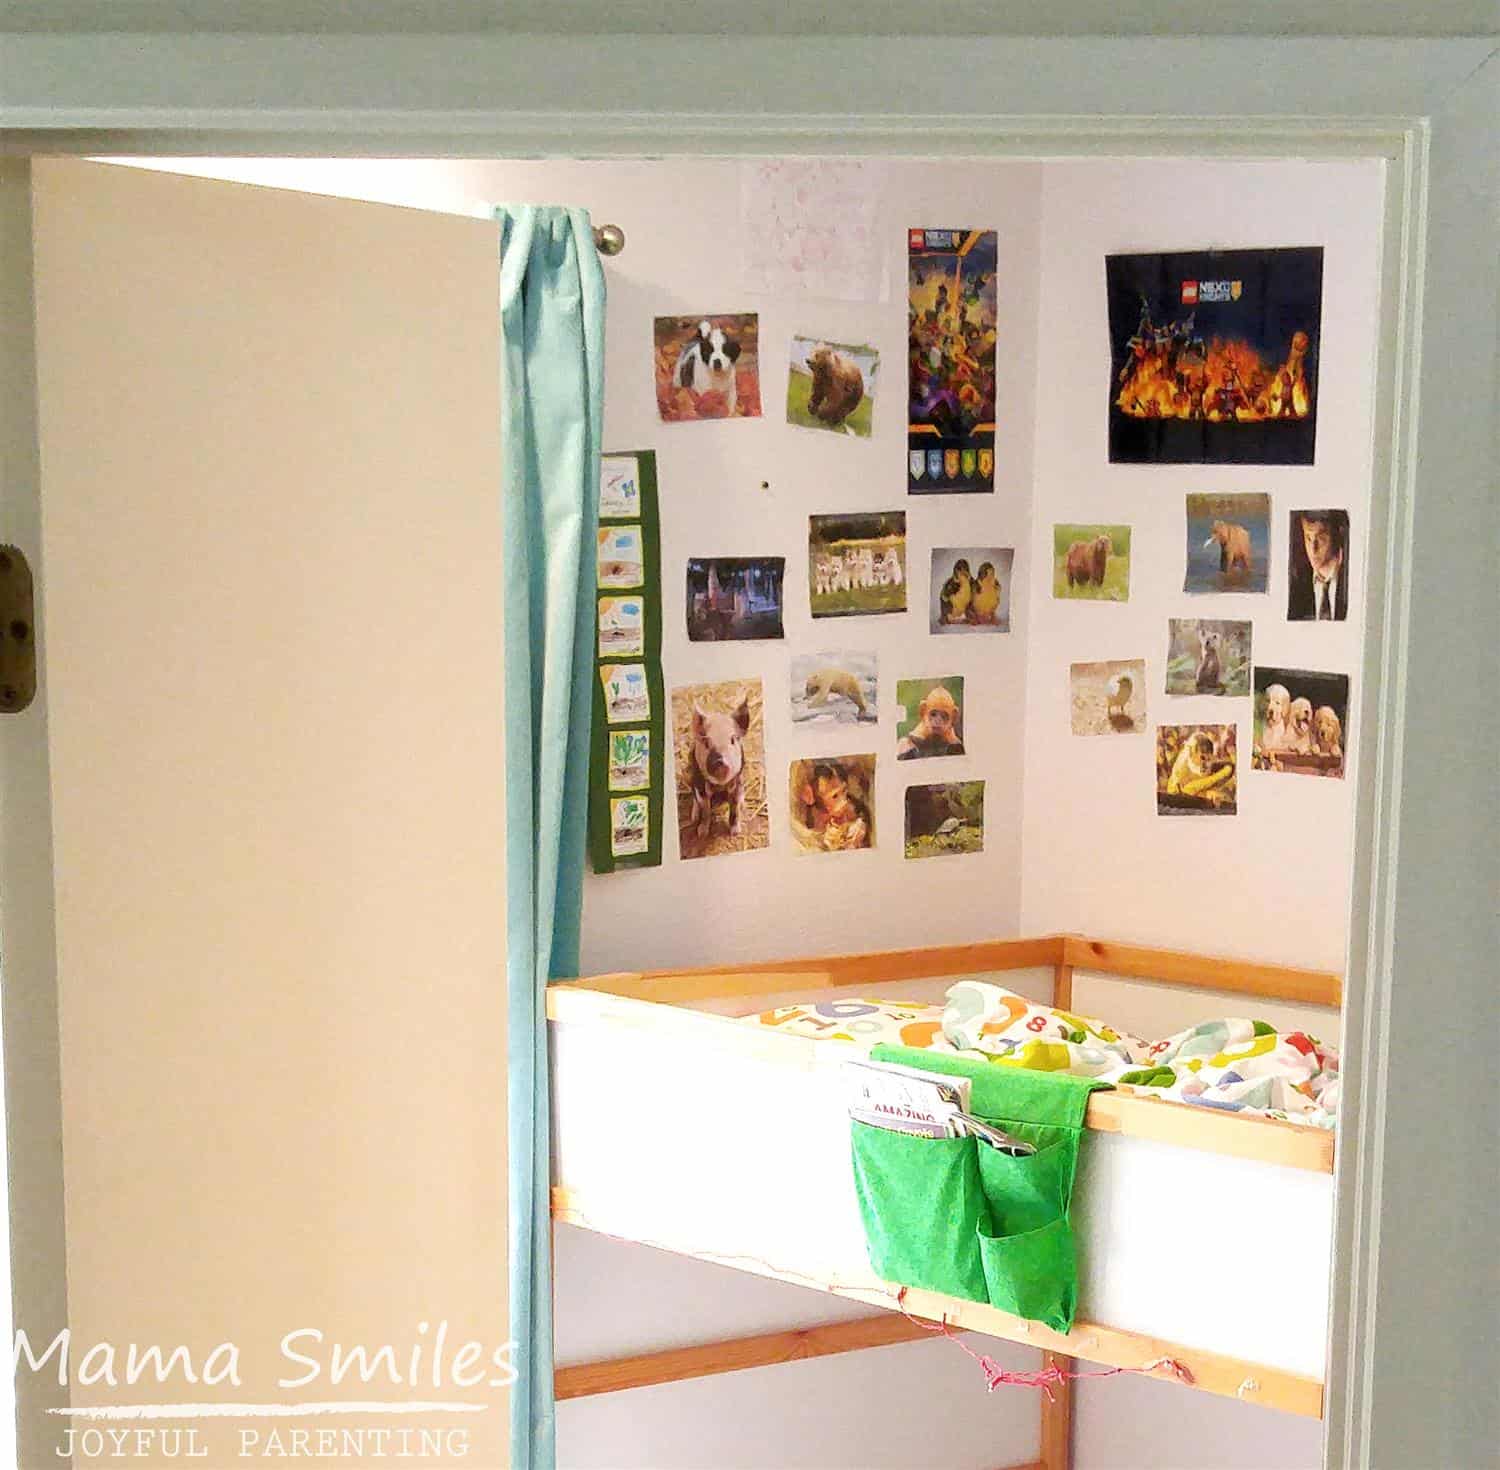 Kids loving being able to decorate their space to reflect their personalities! Check out this low-budget, small space living solution for creating individual spaces for kids